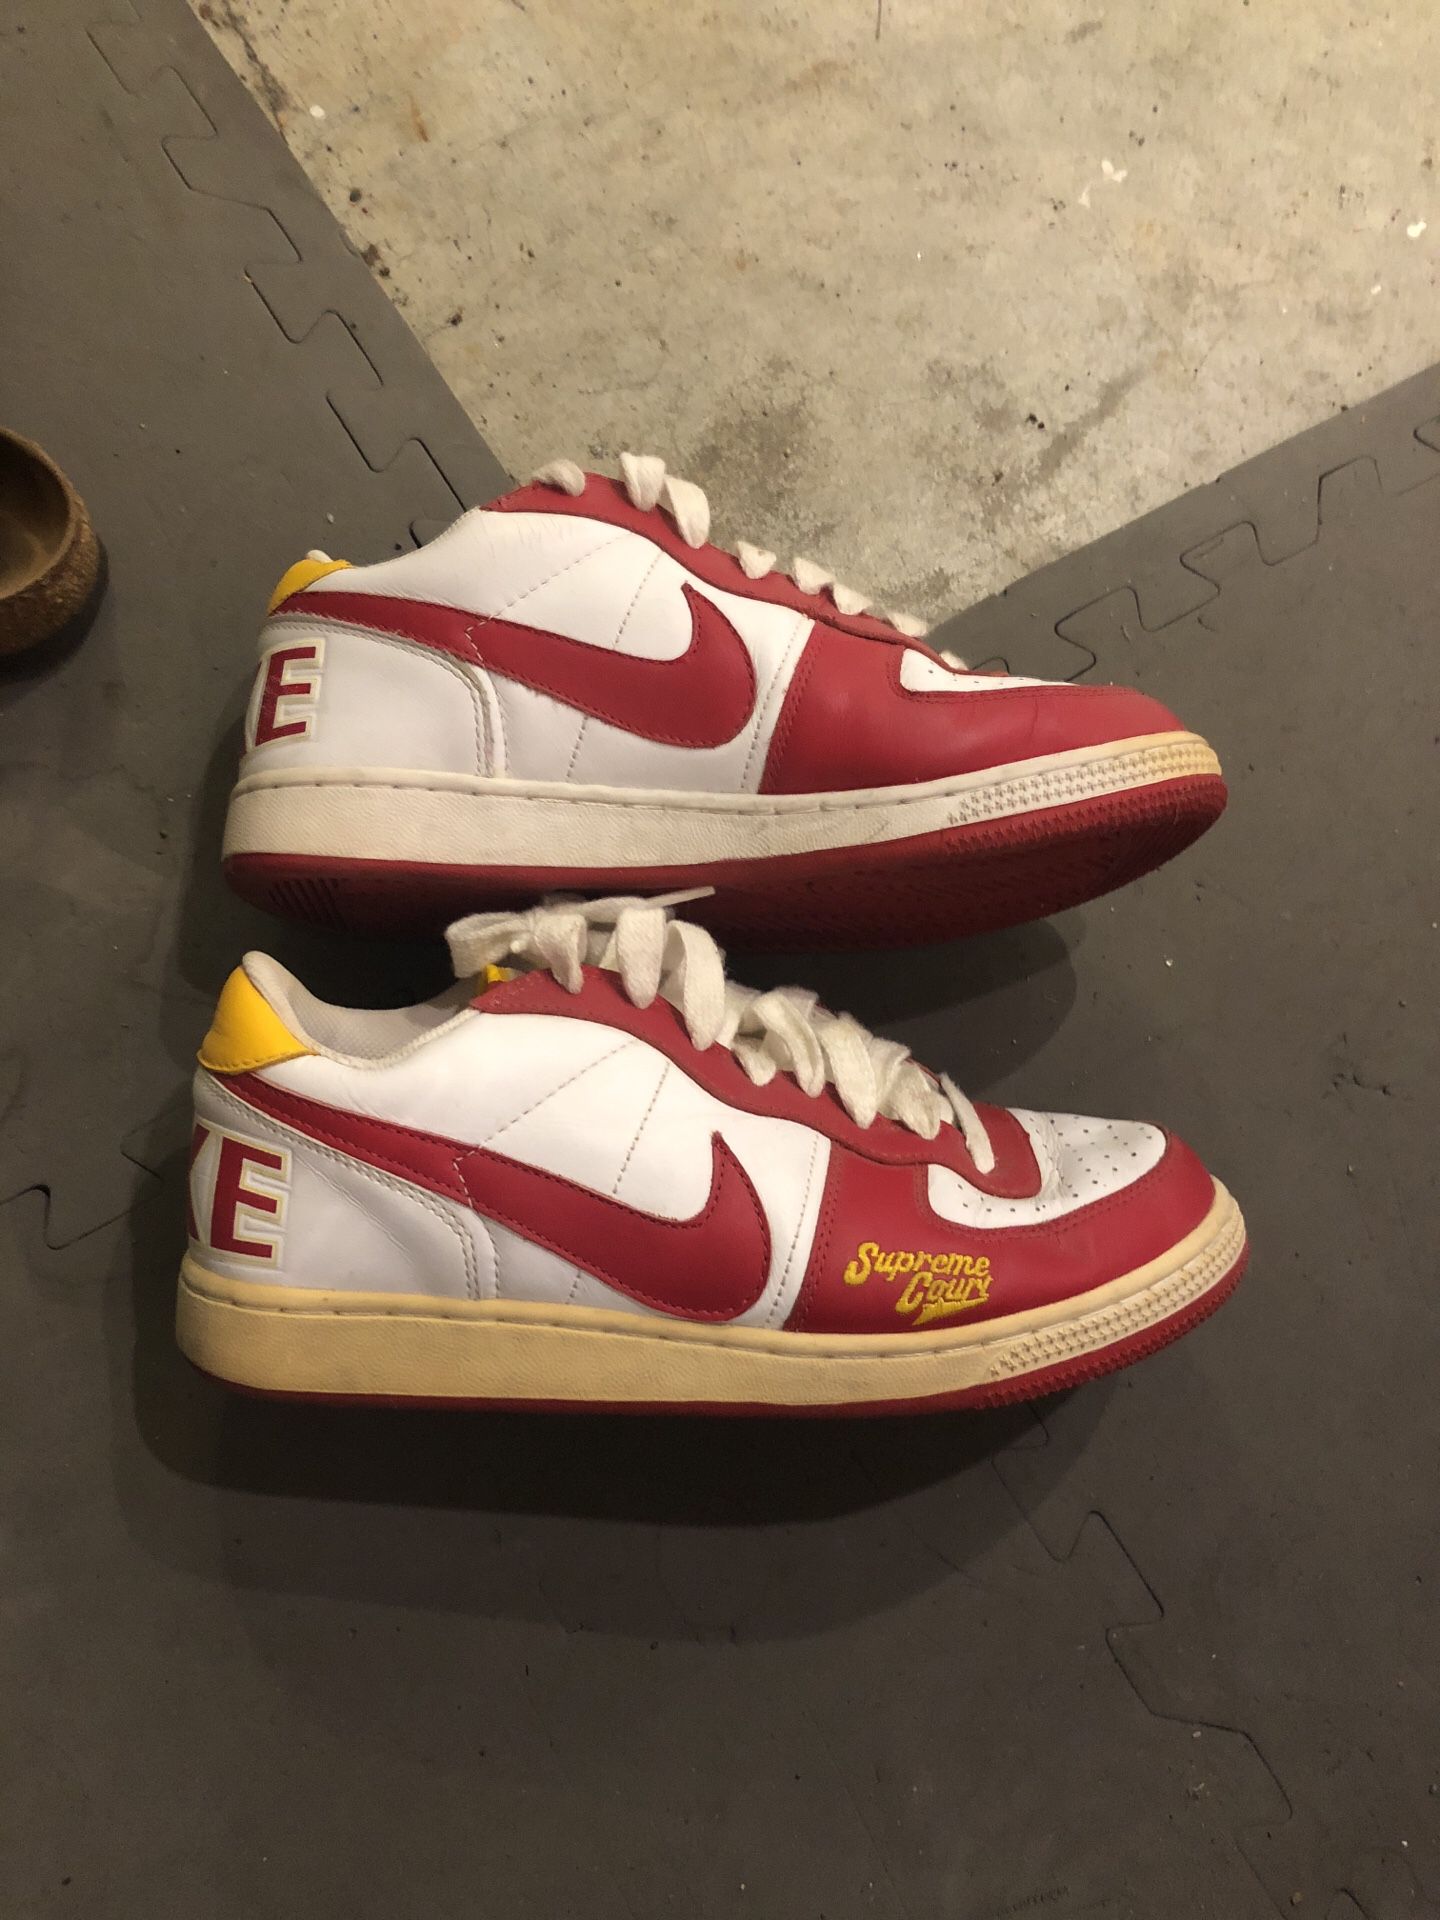 Nike Terminator low supreme court size for Sale Richmond, - OfferUp